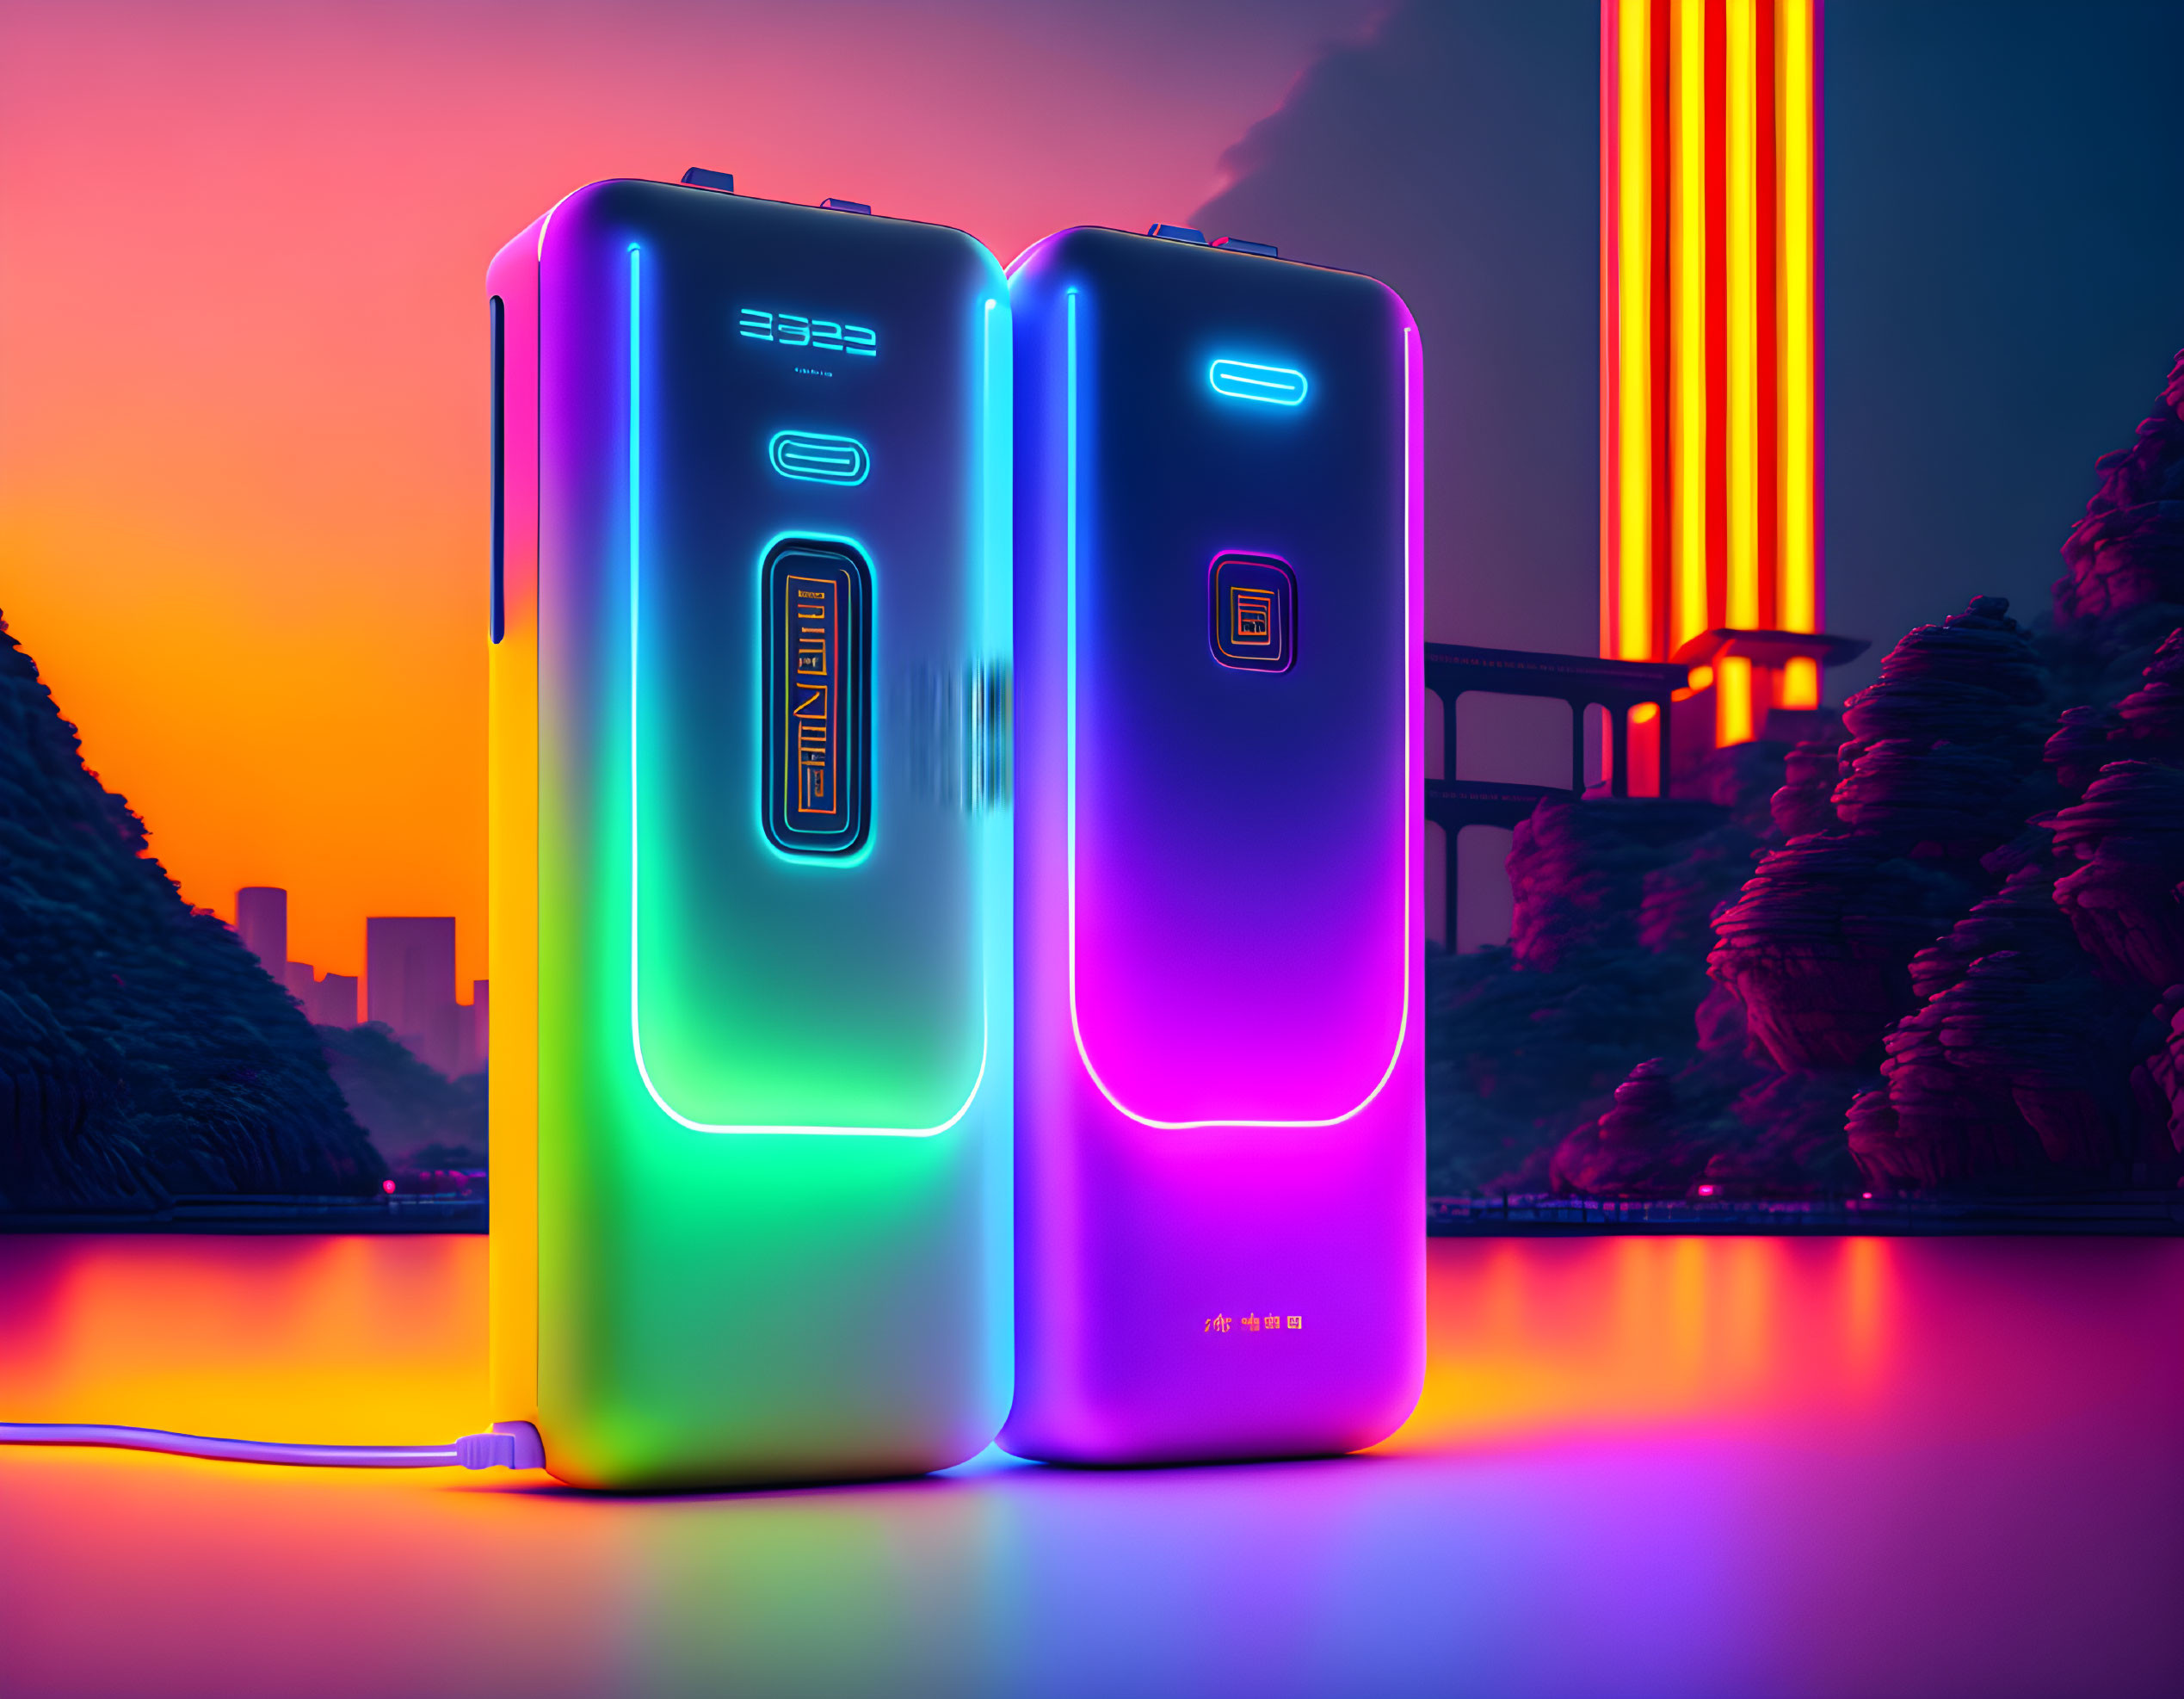 Futuristic neon-lit power banks with digital displays against cityscape.